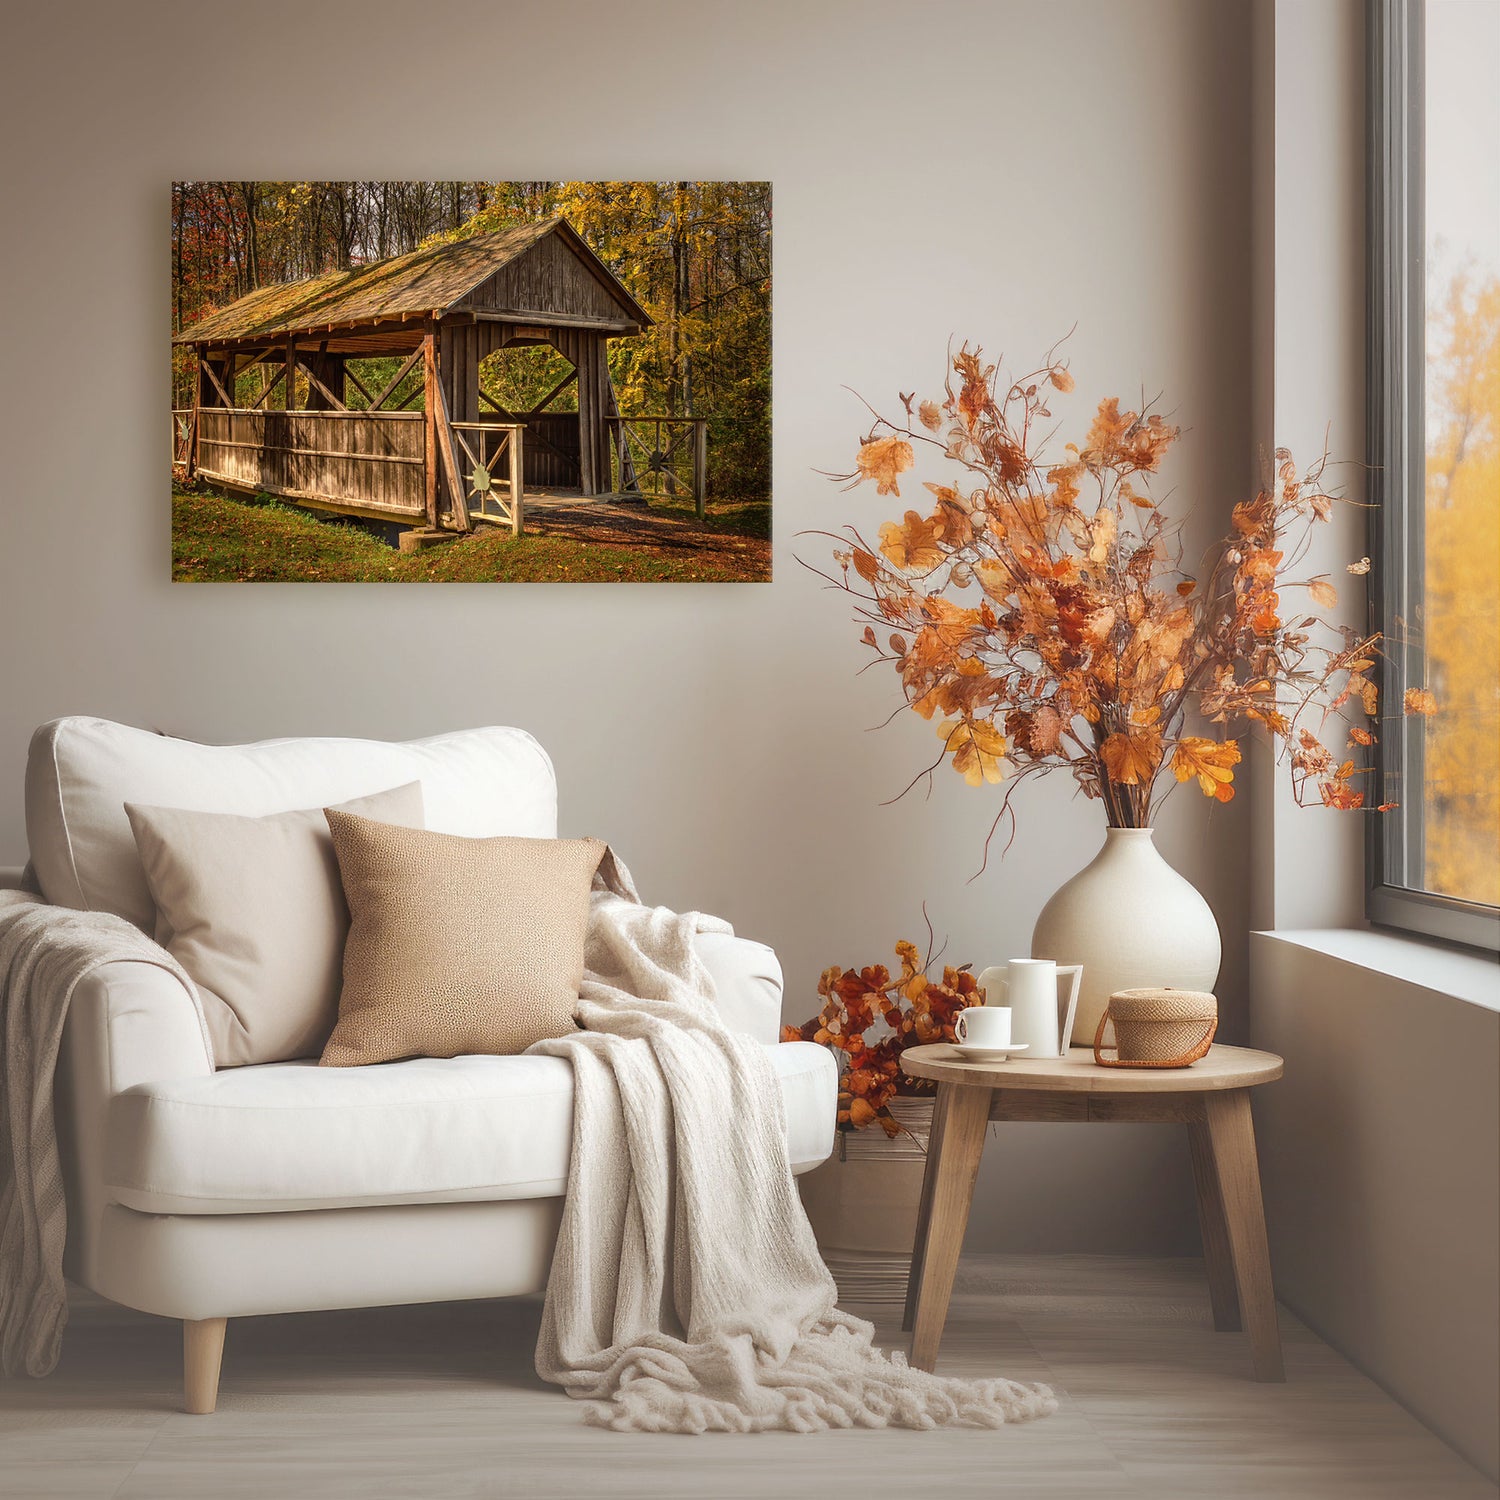 Autumn wall art featuring a covered bride in a colorful fall forest hanging over a chair